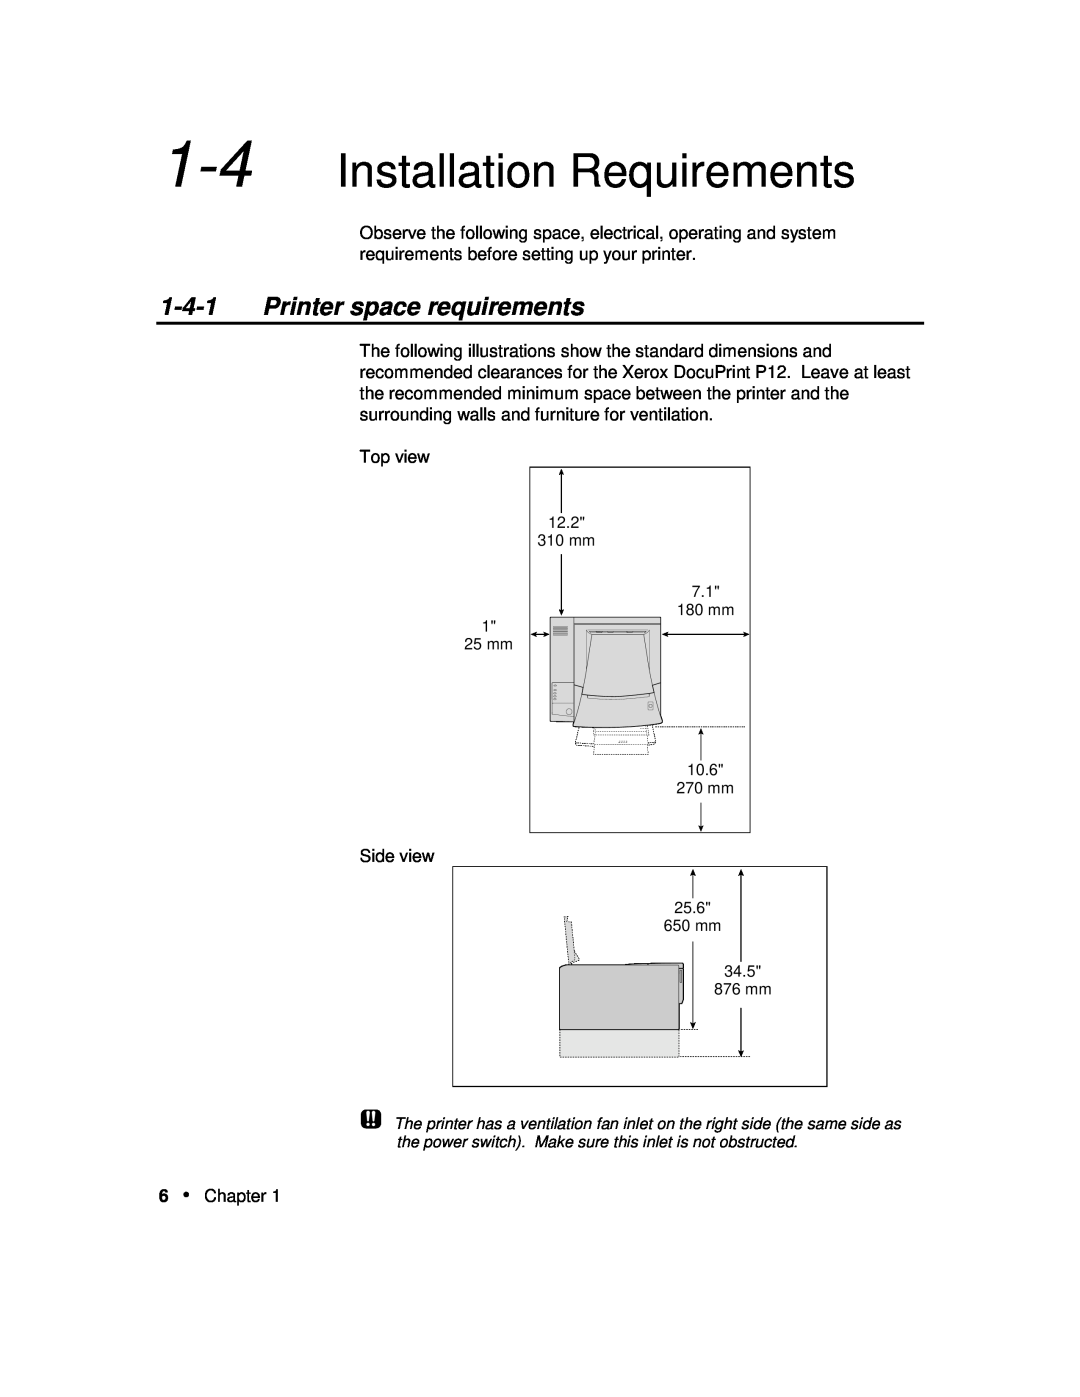 Xerox P12 manual Installation Requirements, Printer space requirements 